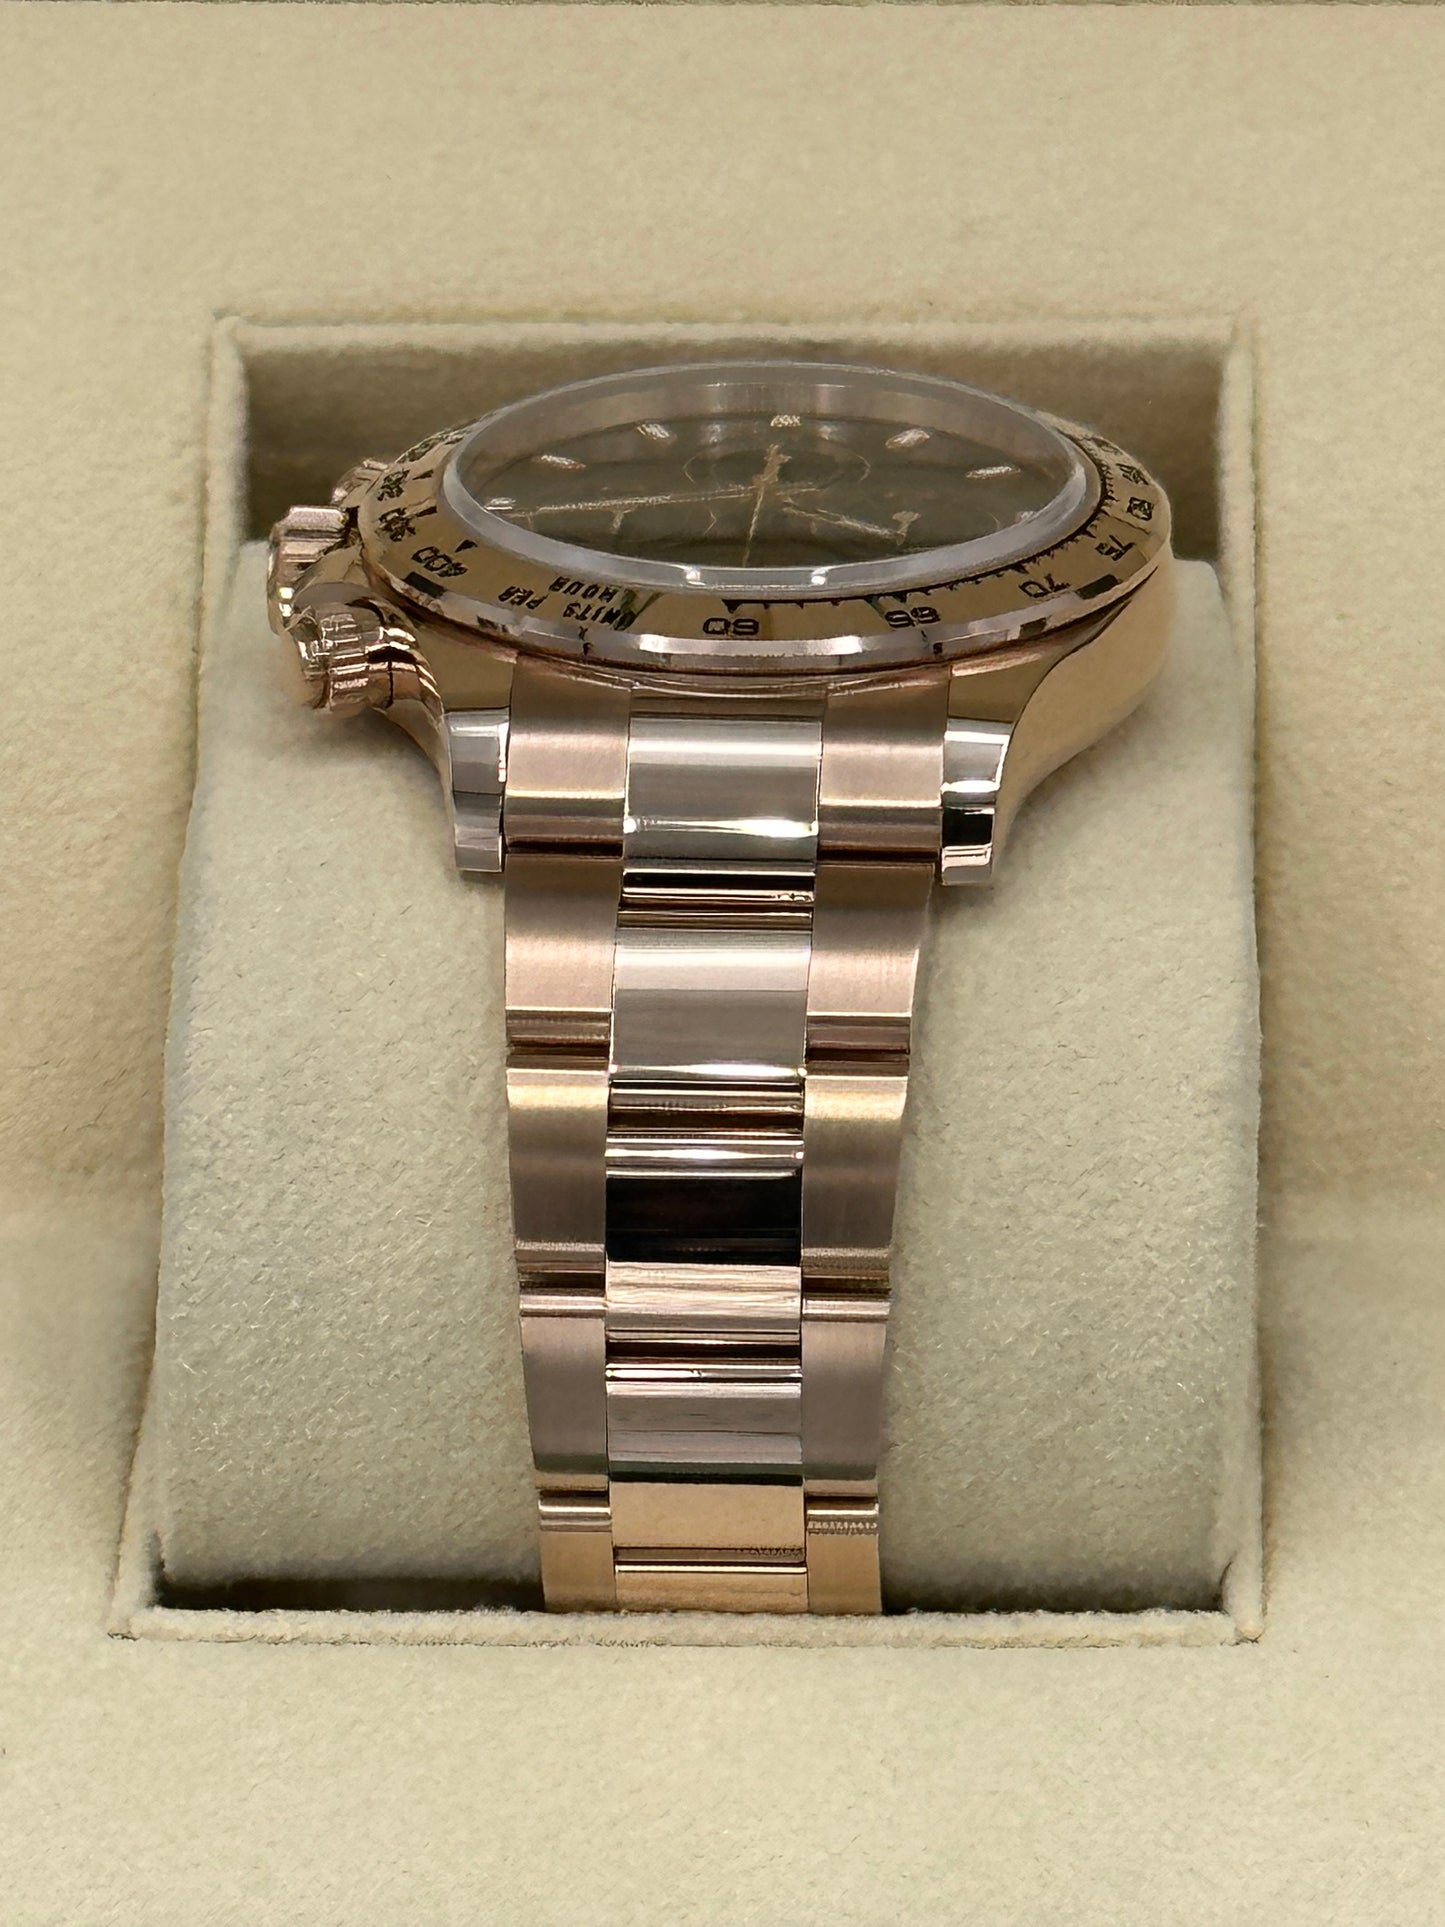 NEW 2023 Rolex Daytona 116505 Rose Gold Chocolate Dial - MyWatchLLC